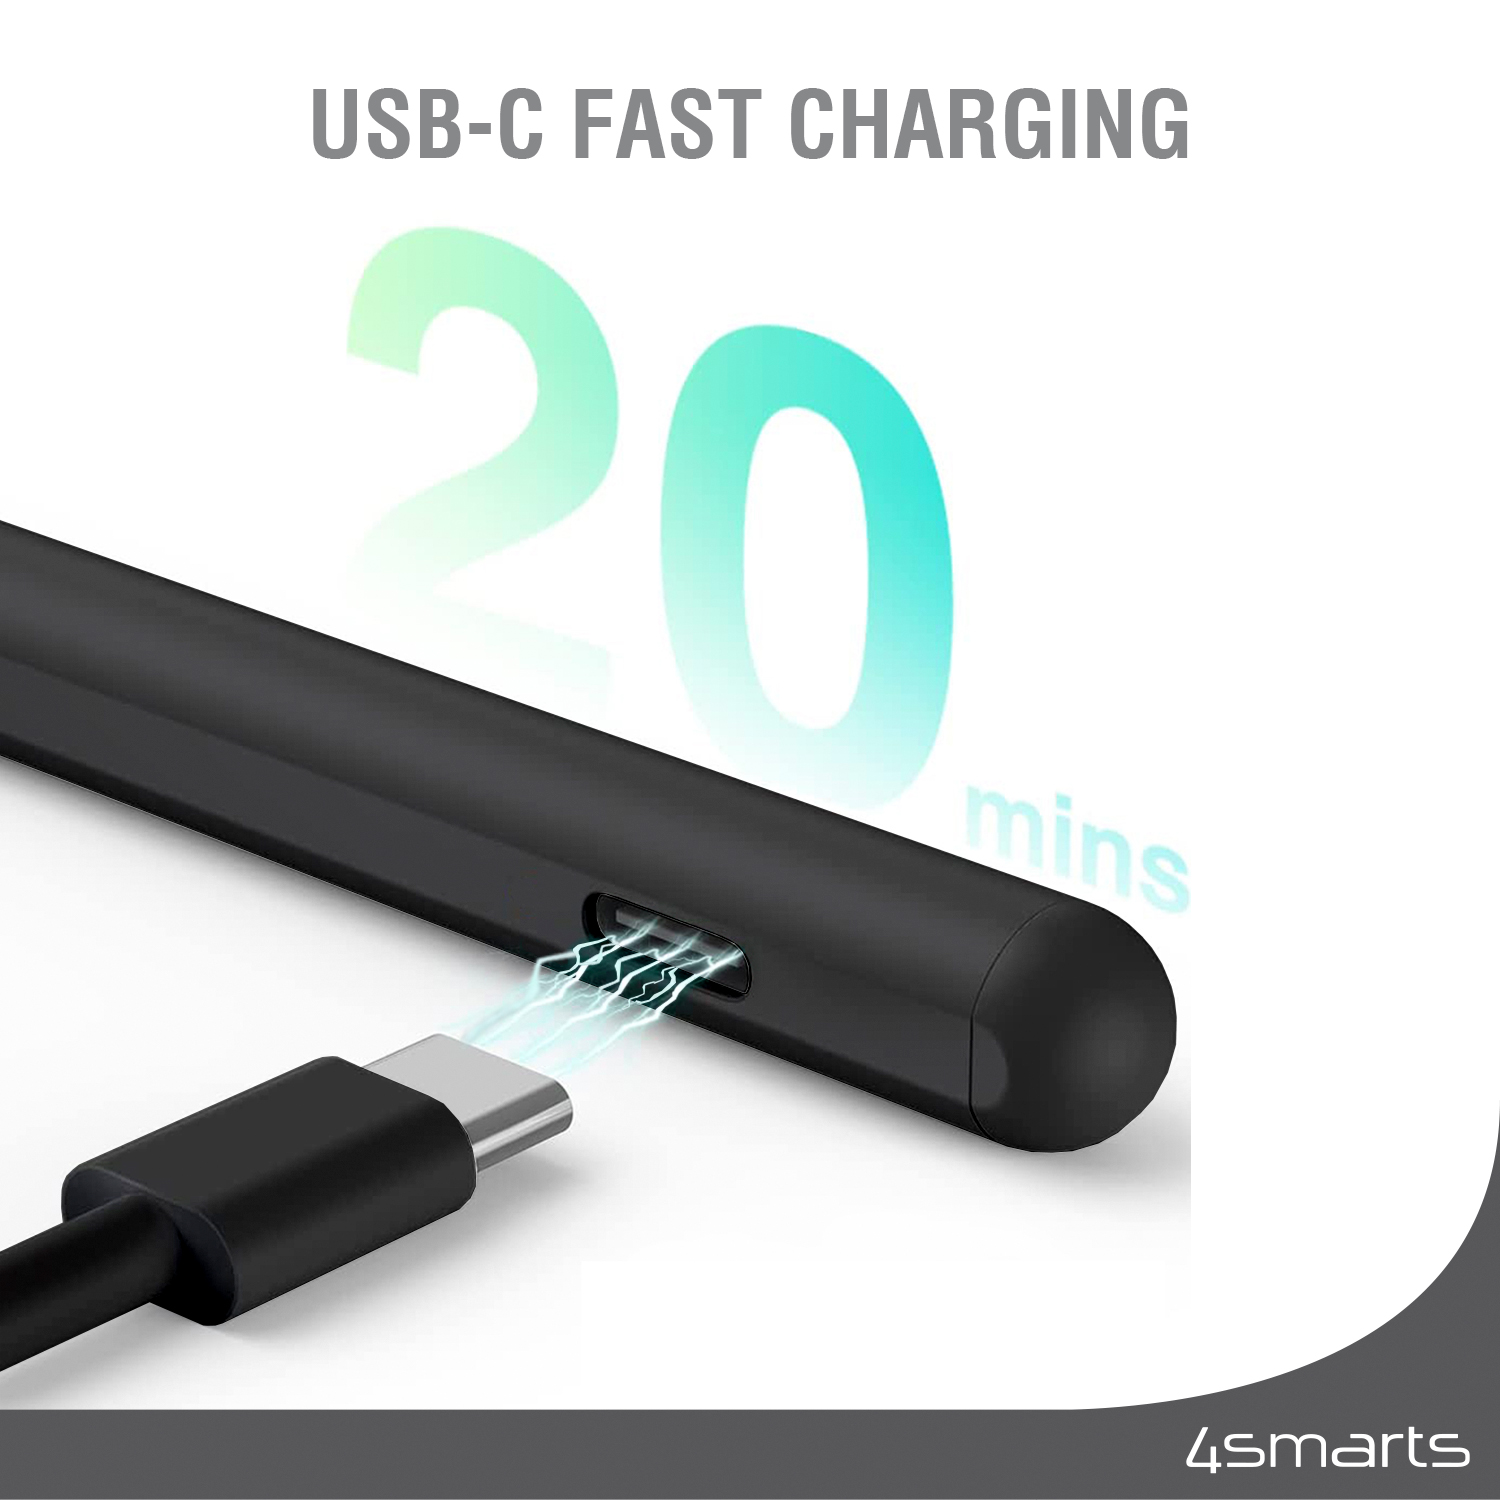 Charge the 4smarts Pencil Pro 3 in just 20 minutes either directly from the USB-C port of your Apple device or from a USB-C power adapter.